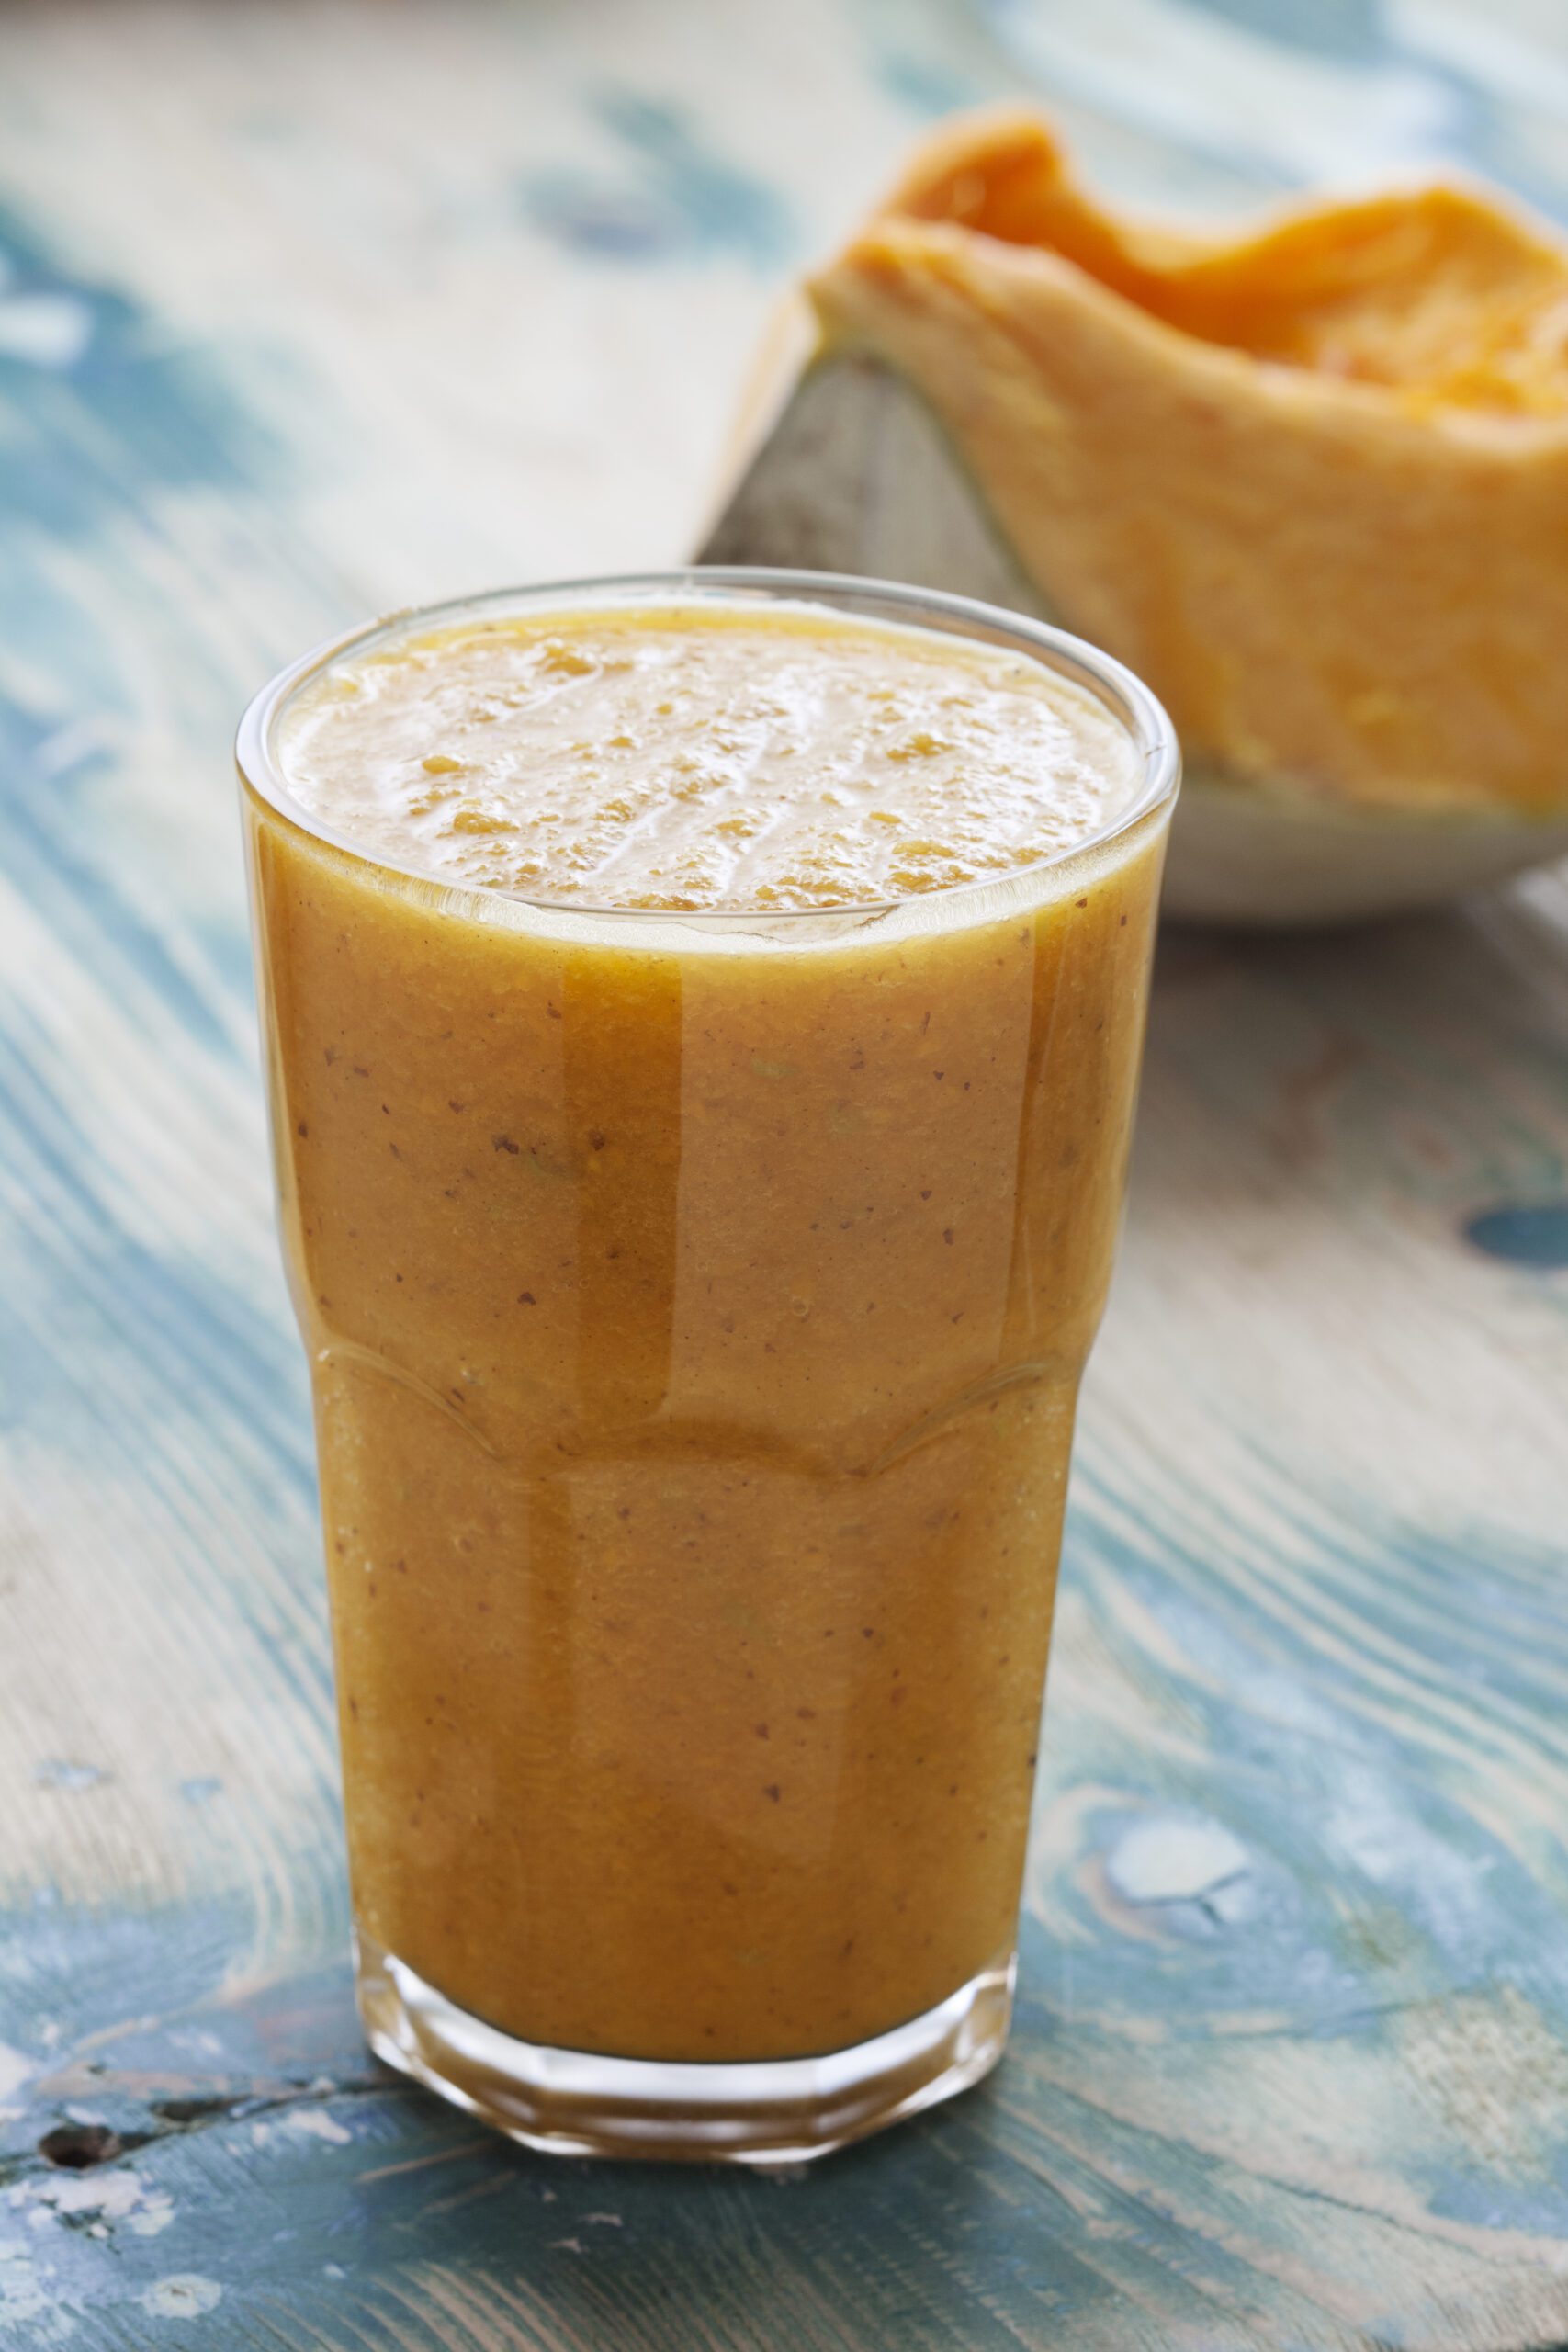 Pumpkin smoothie in a clear glass